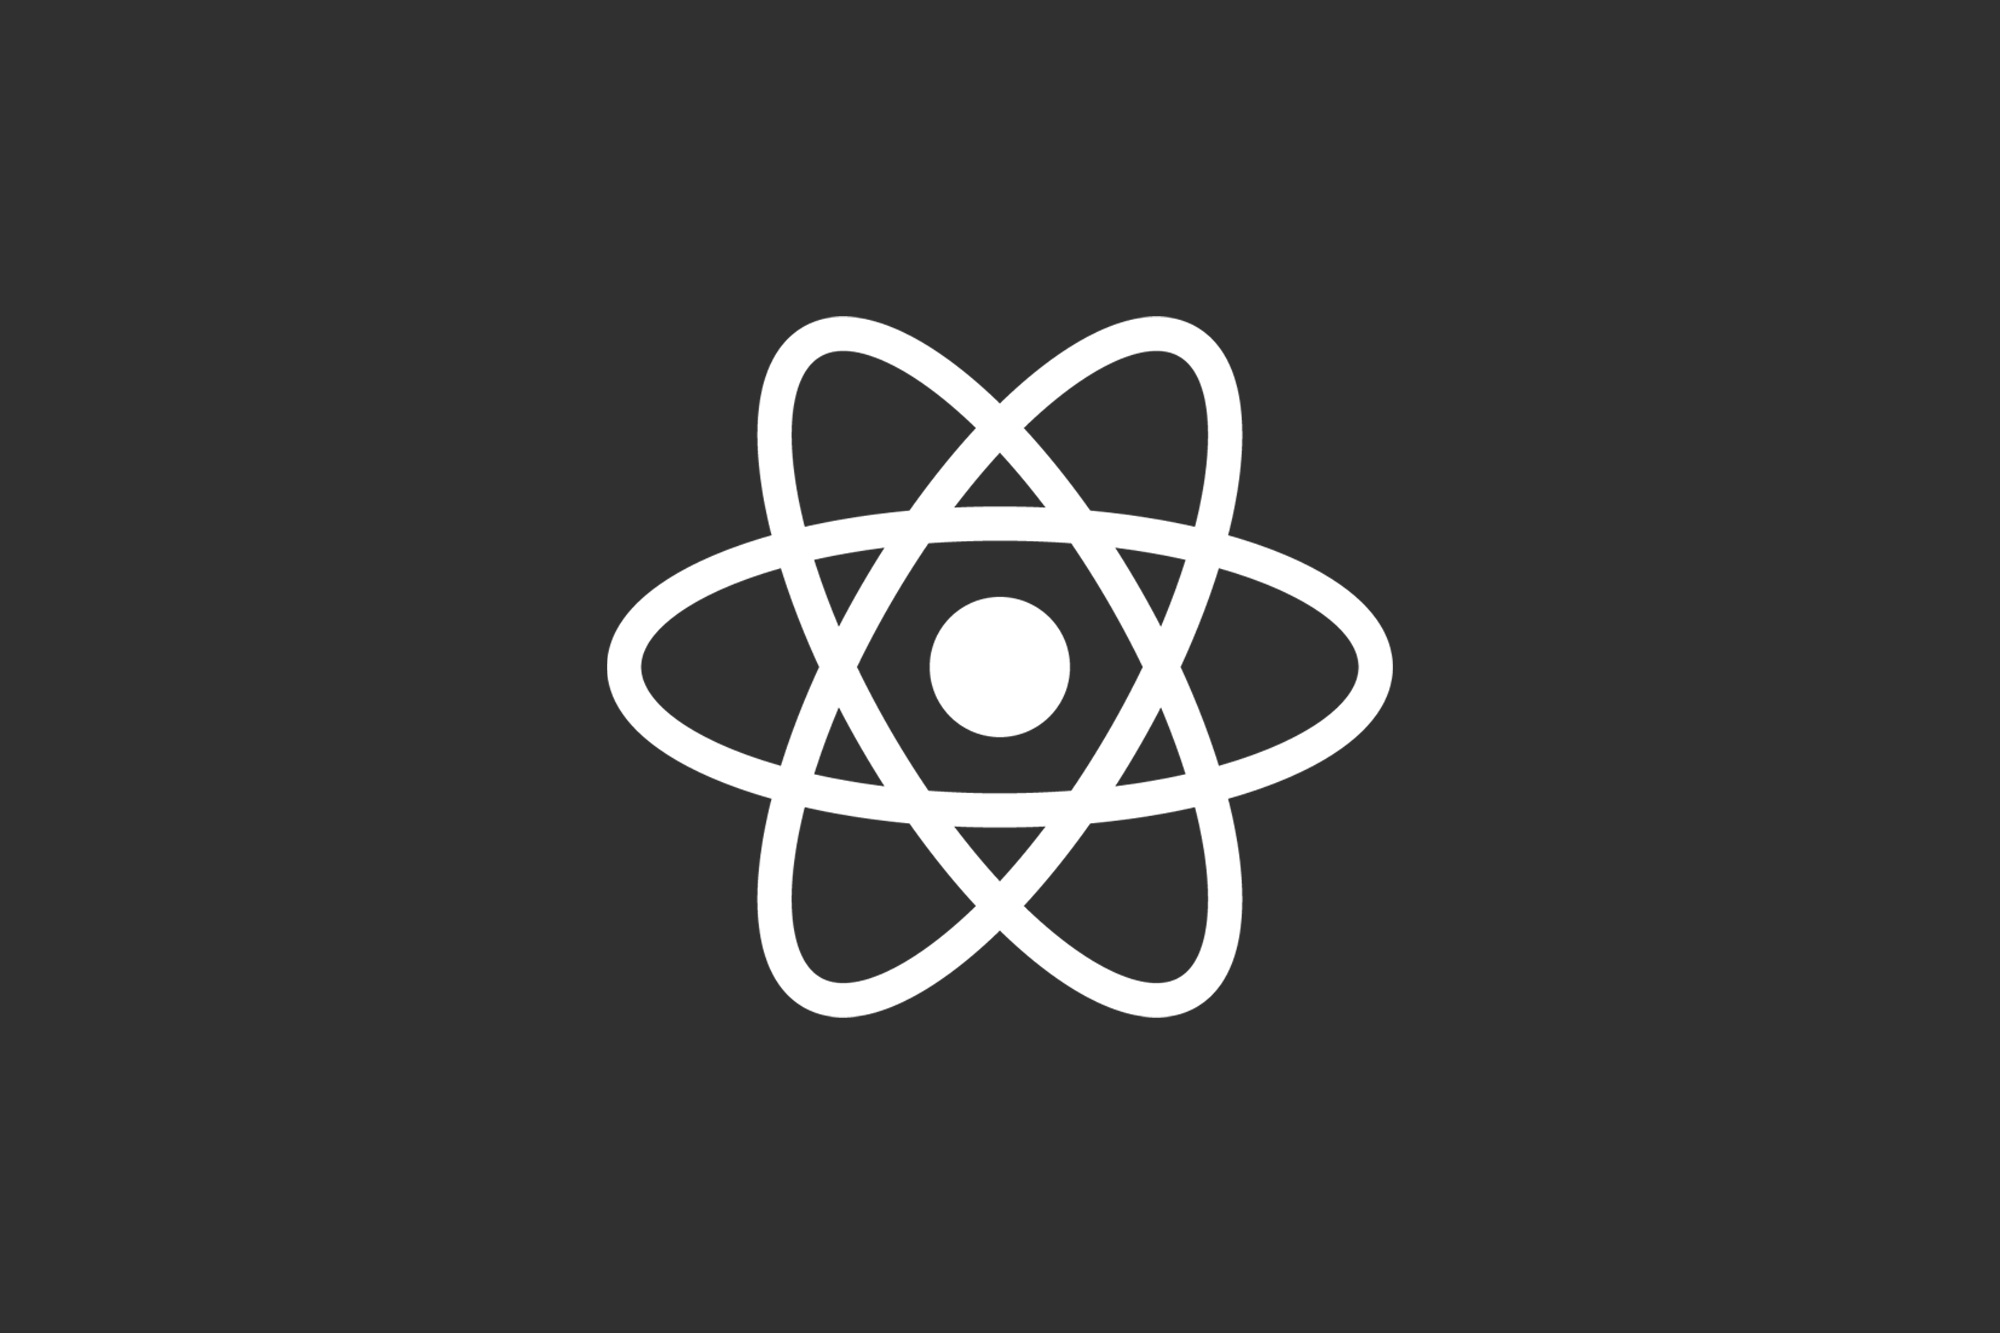 How to Learn React: A Guide for Beginner Web Developers